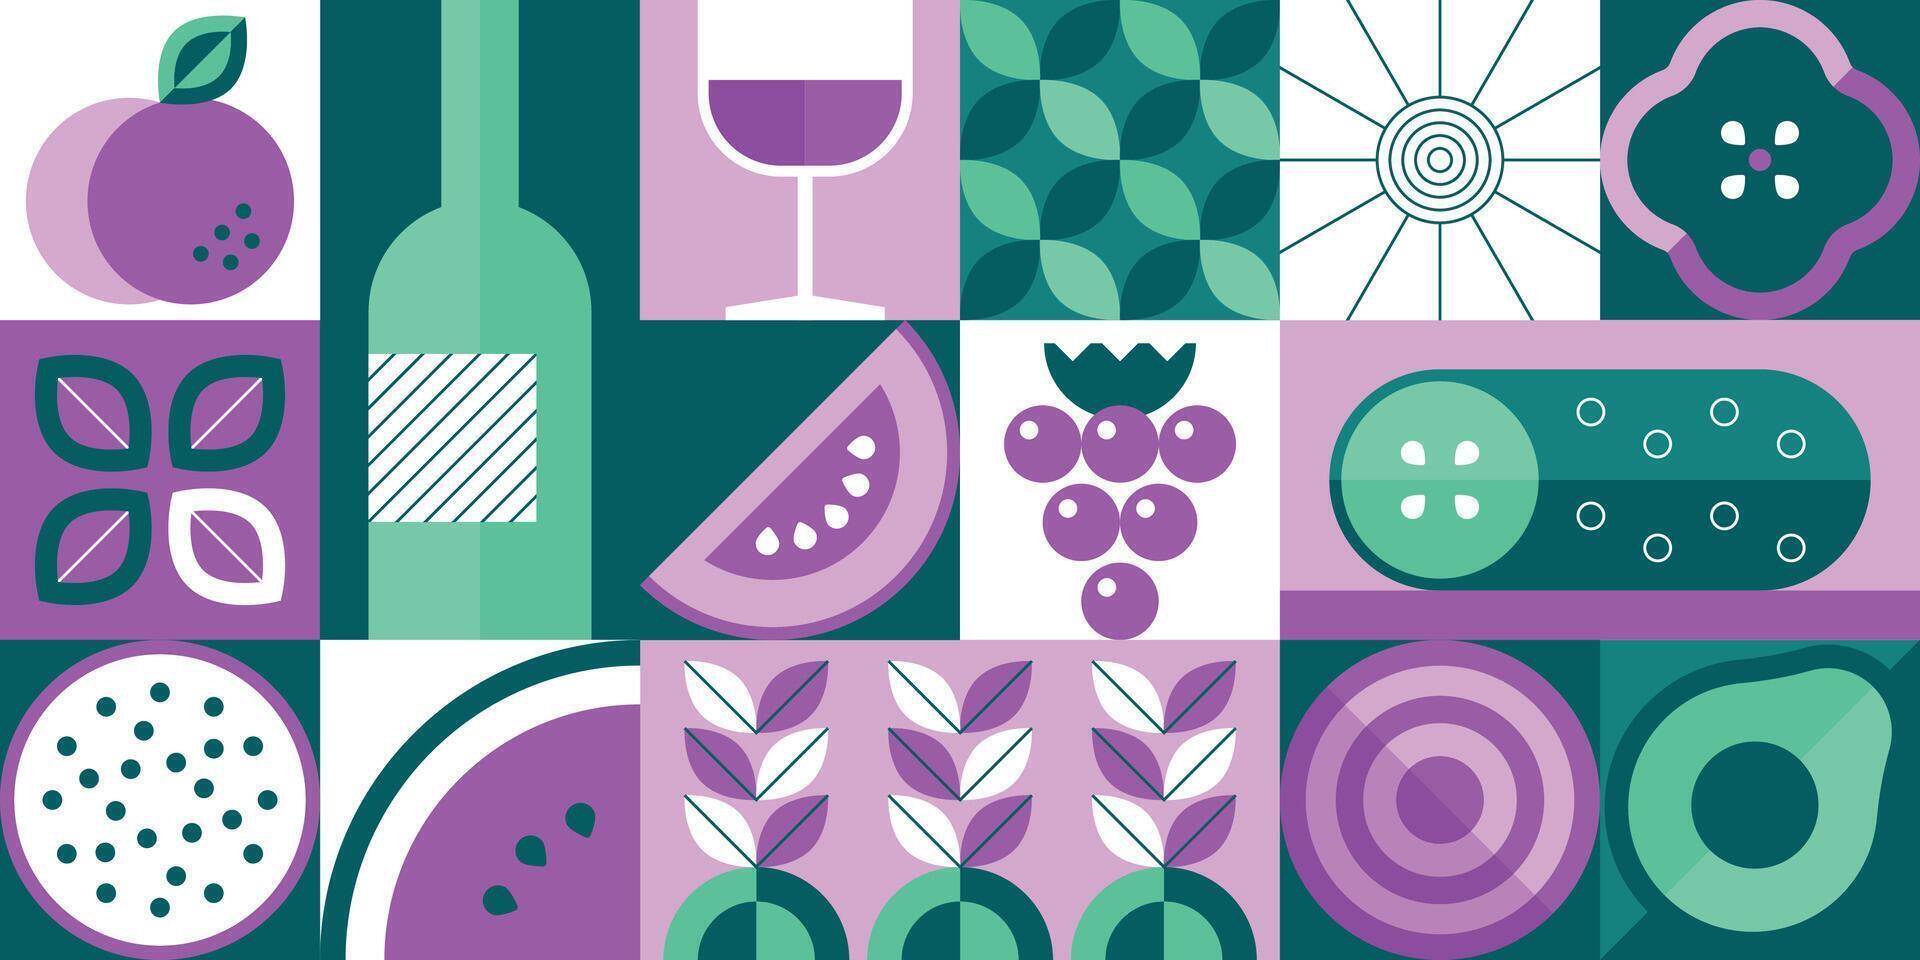 Abstract food. Minimalistic geometric fruits and vegetables on brutalistic banner. Vector organic food illustration